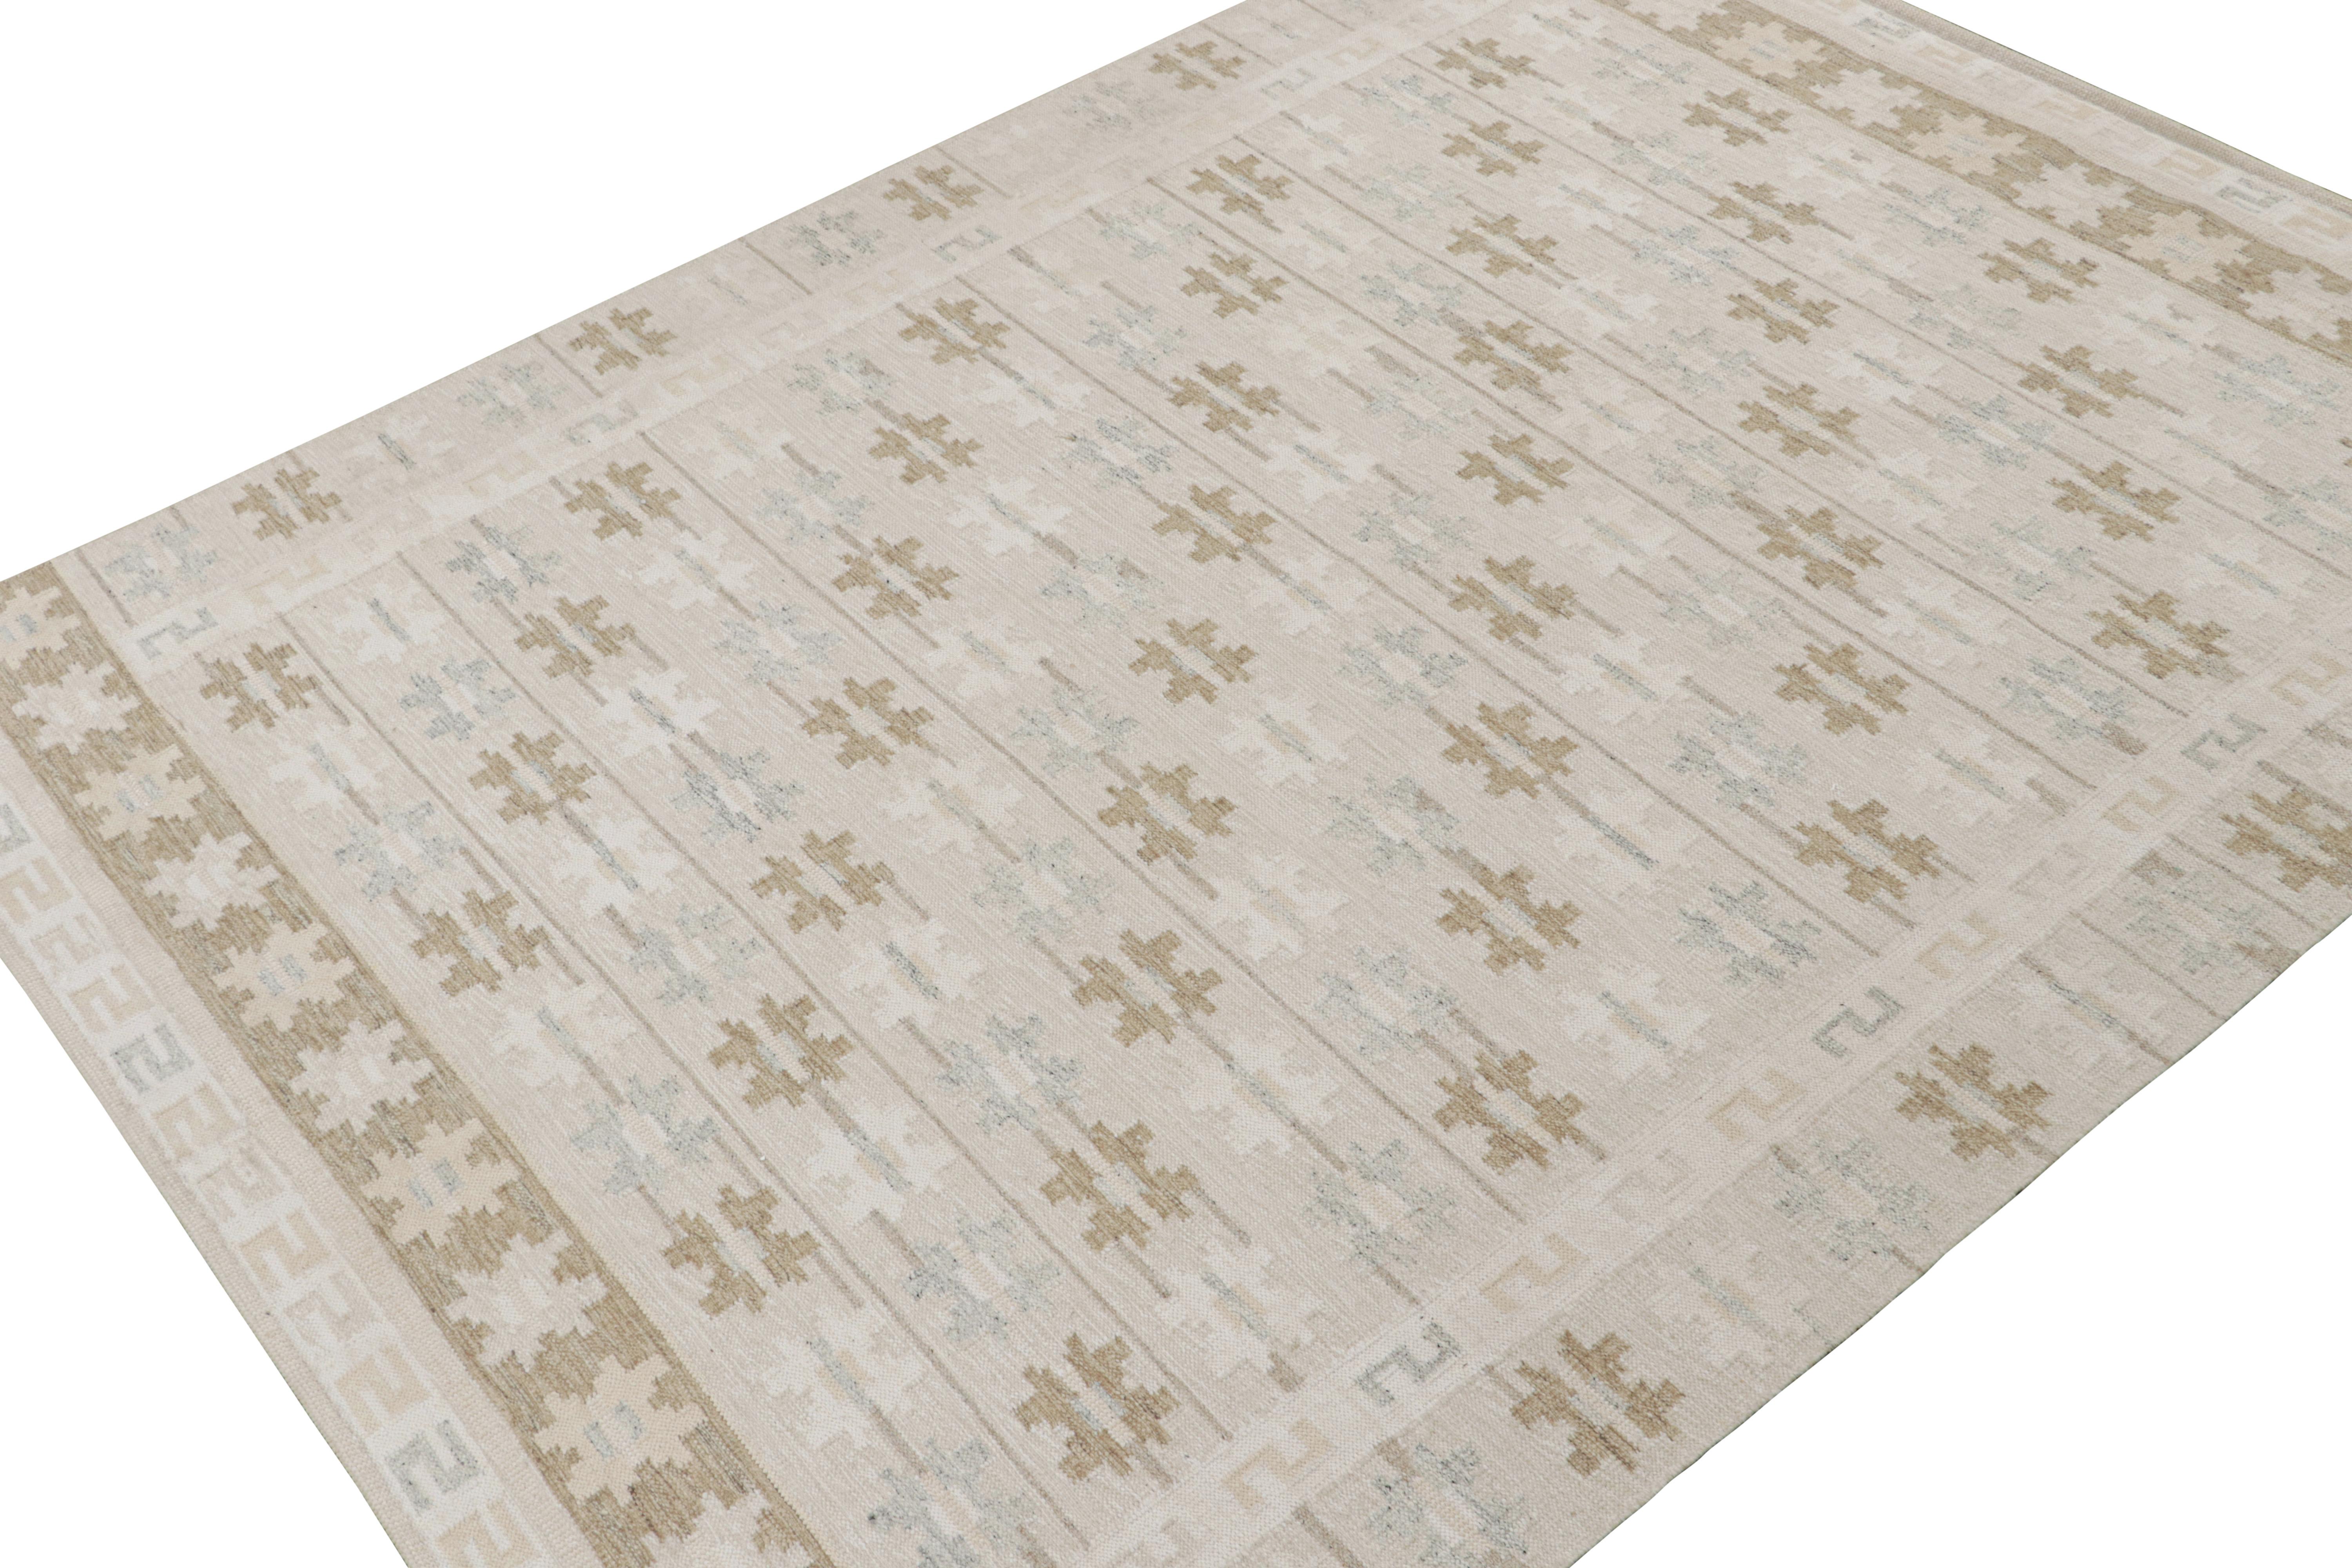 Indian Rug & Kilim’s Scandinavian Style Kilim in Taupe & Beige-Brown Geometric Patterns For Sale